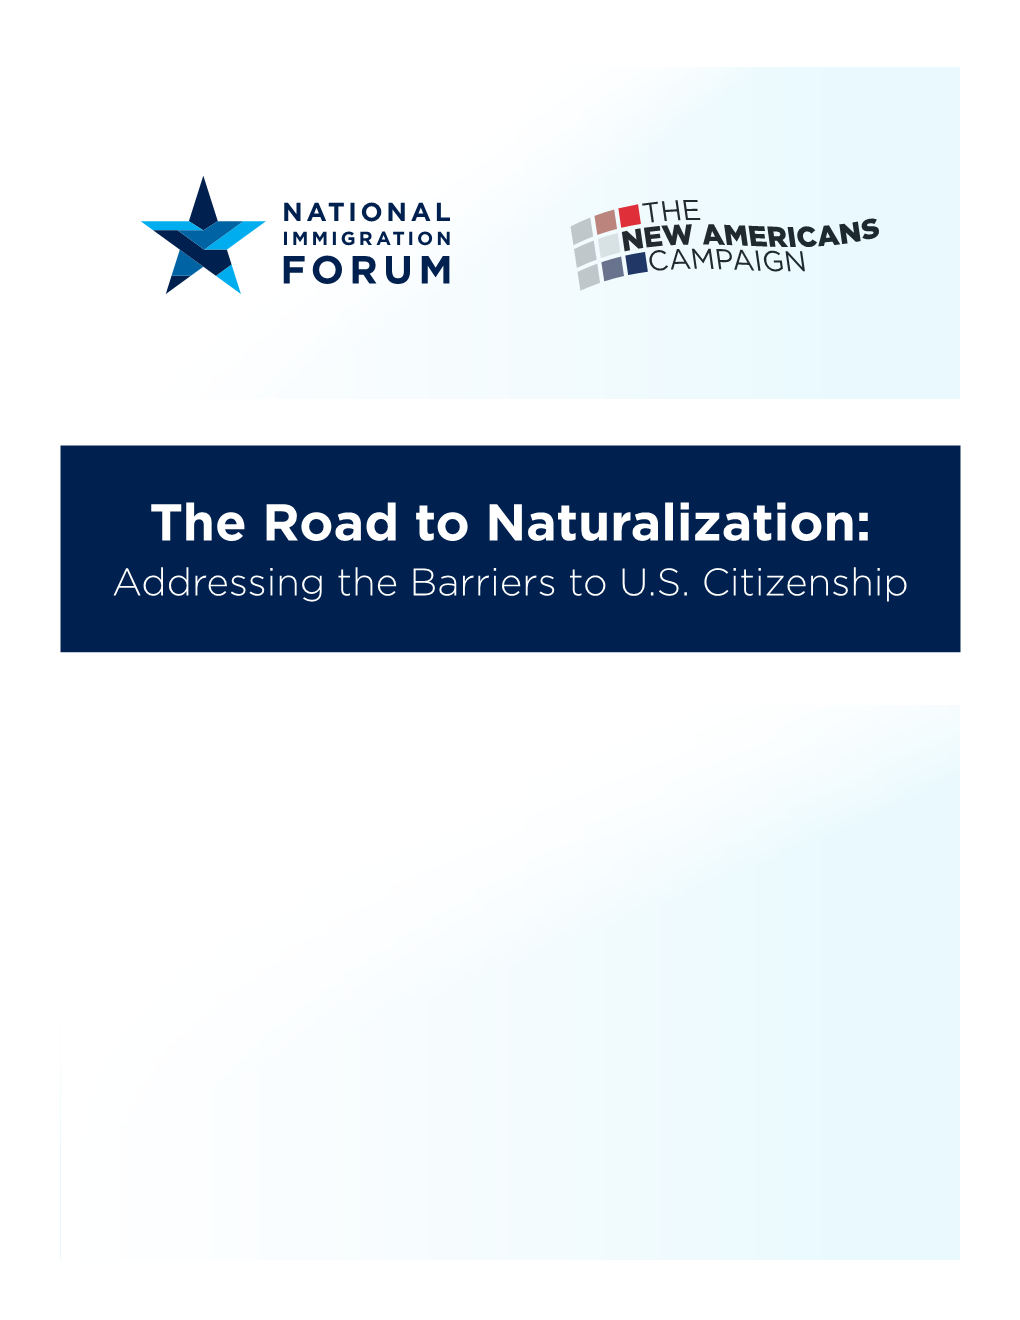 The Road to Naturalization: Addressing the Barriers to U.S